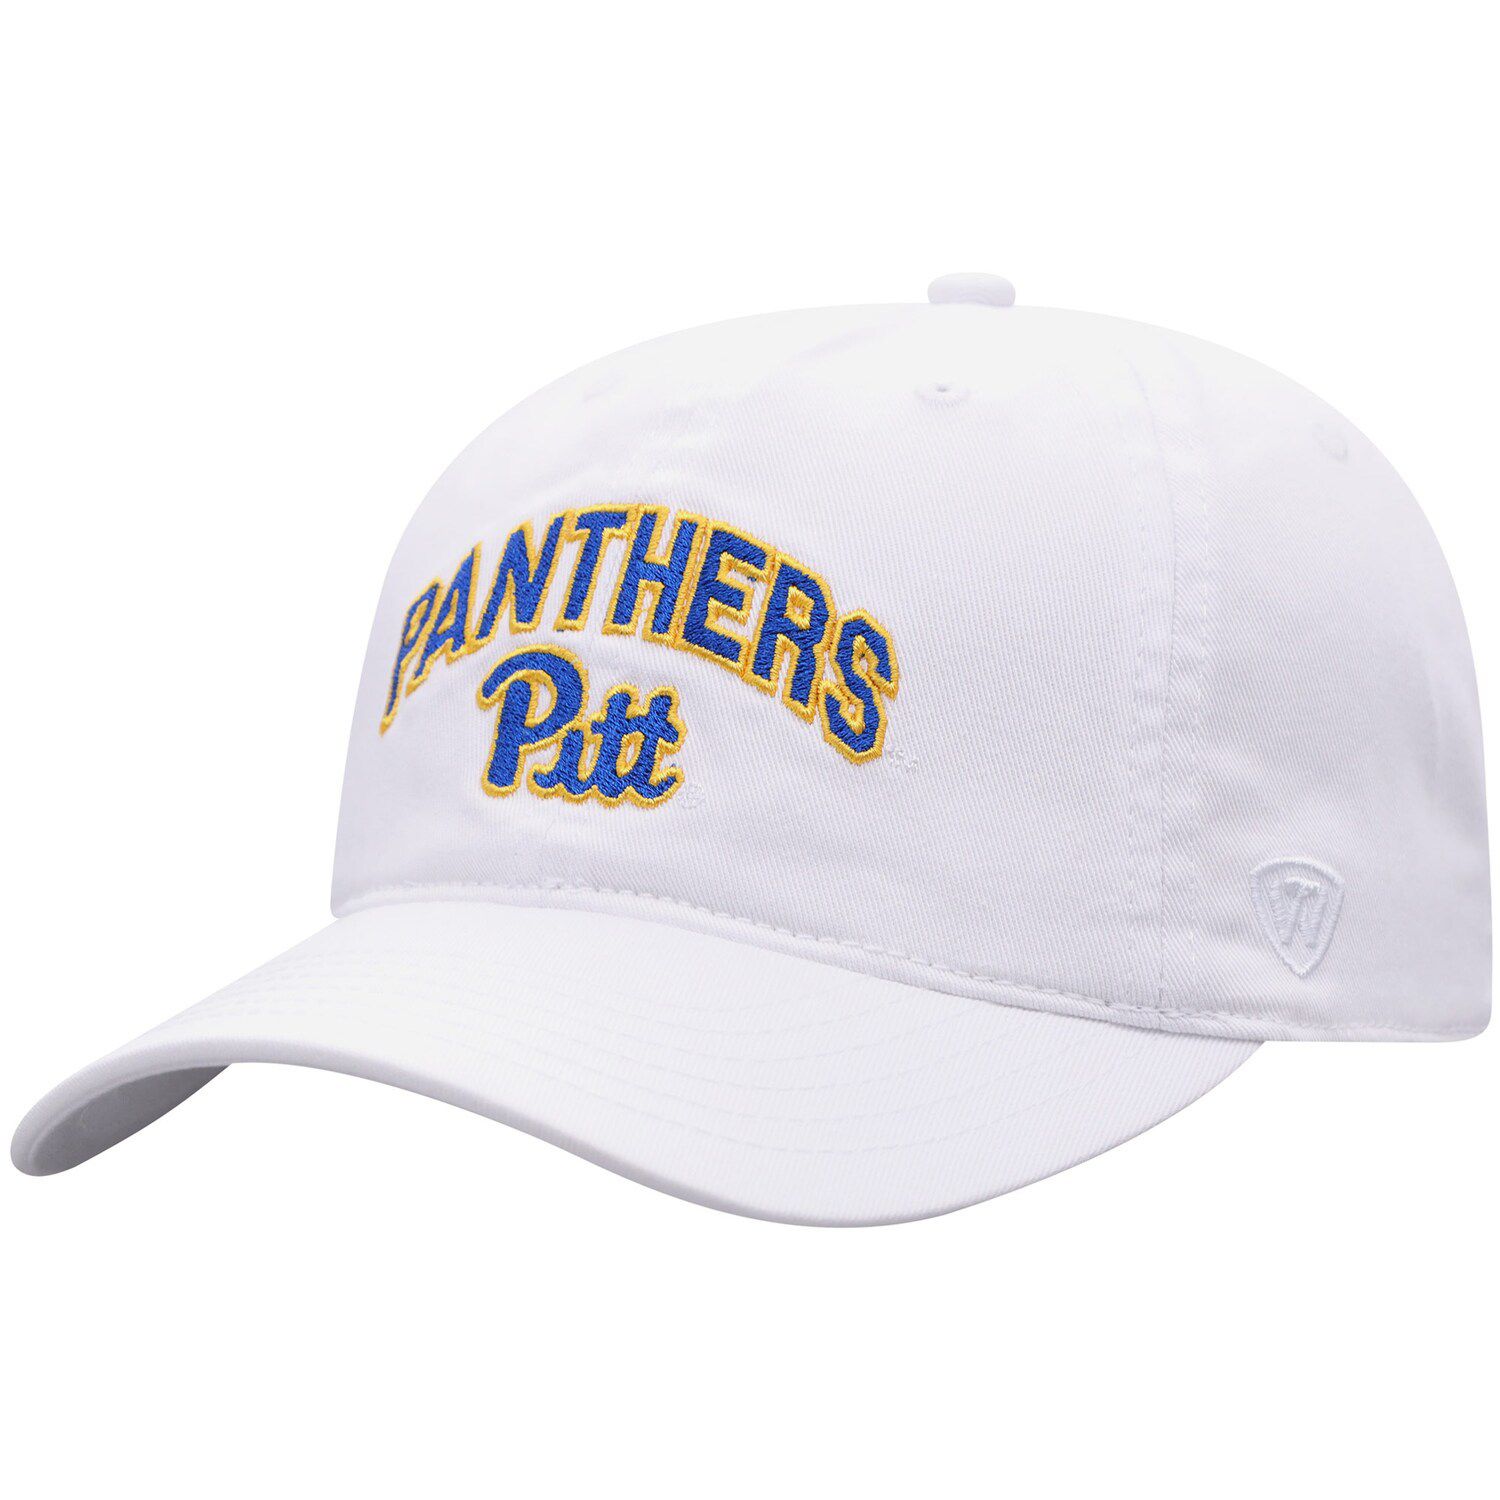 Image for Unbranded Men's Top of the World White Pitt Panthers Classic Arch Adjustable Hat at Kohl's.